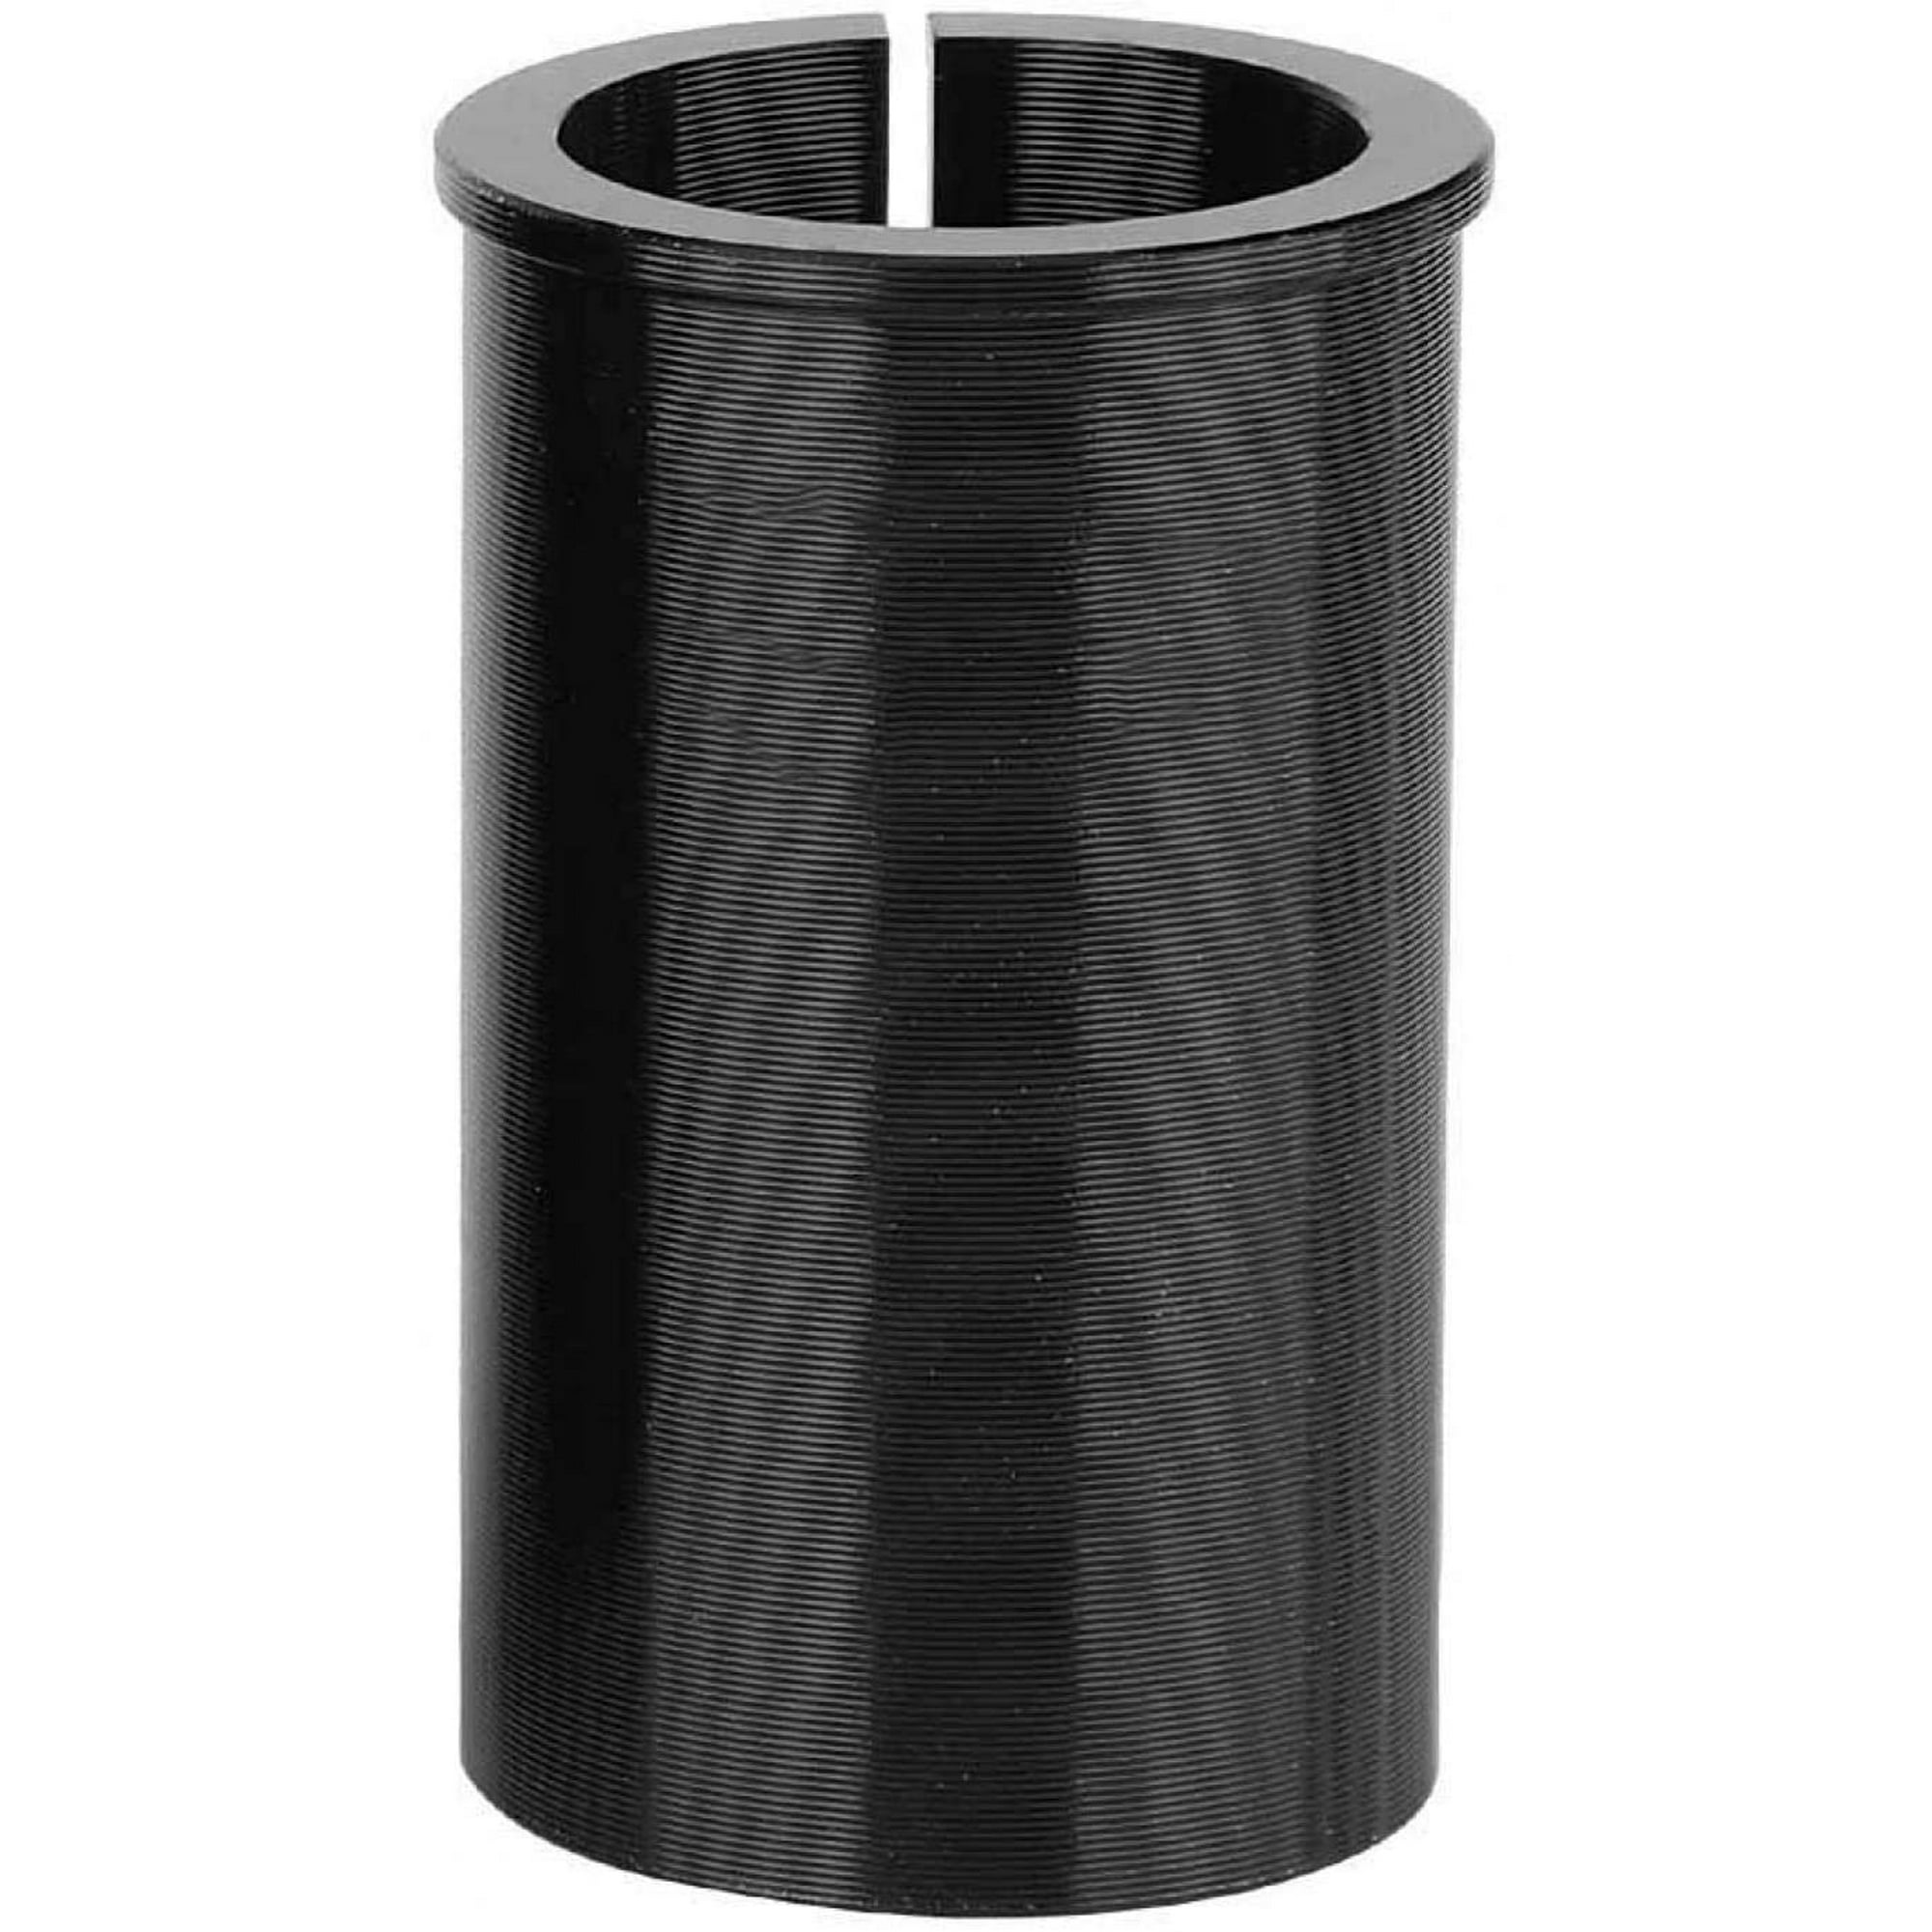 Bicycle Seatpost Tube Adapter 27.2mm to 33.9mm 